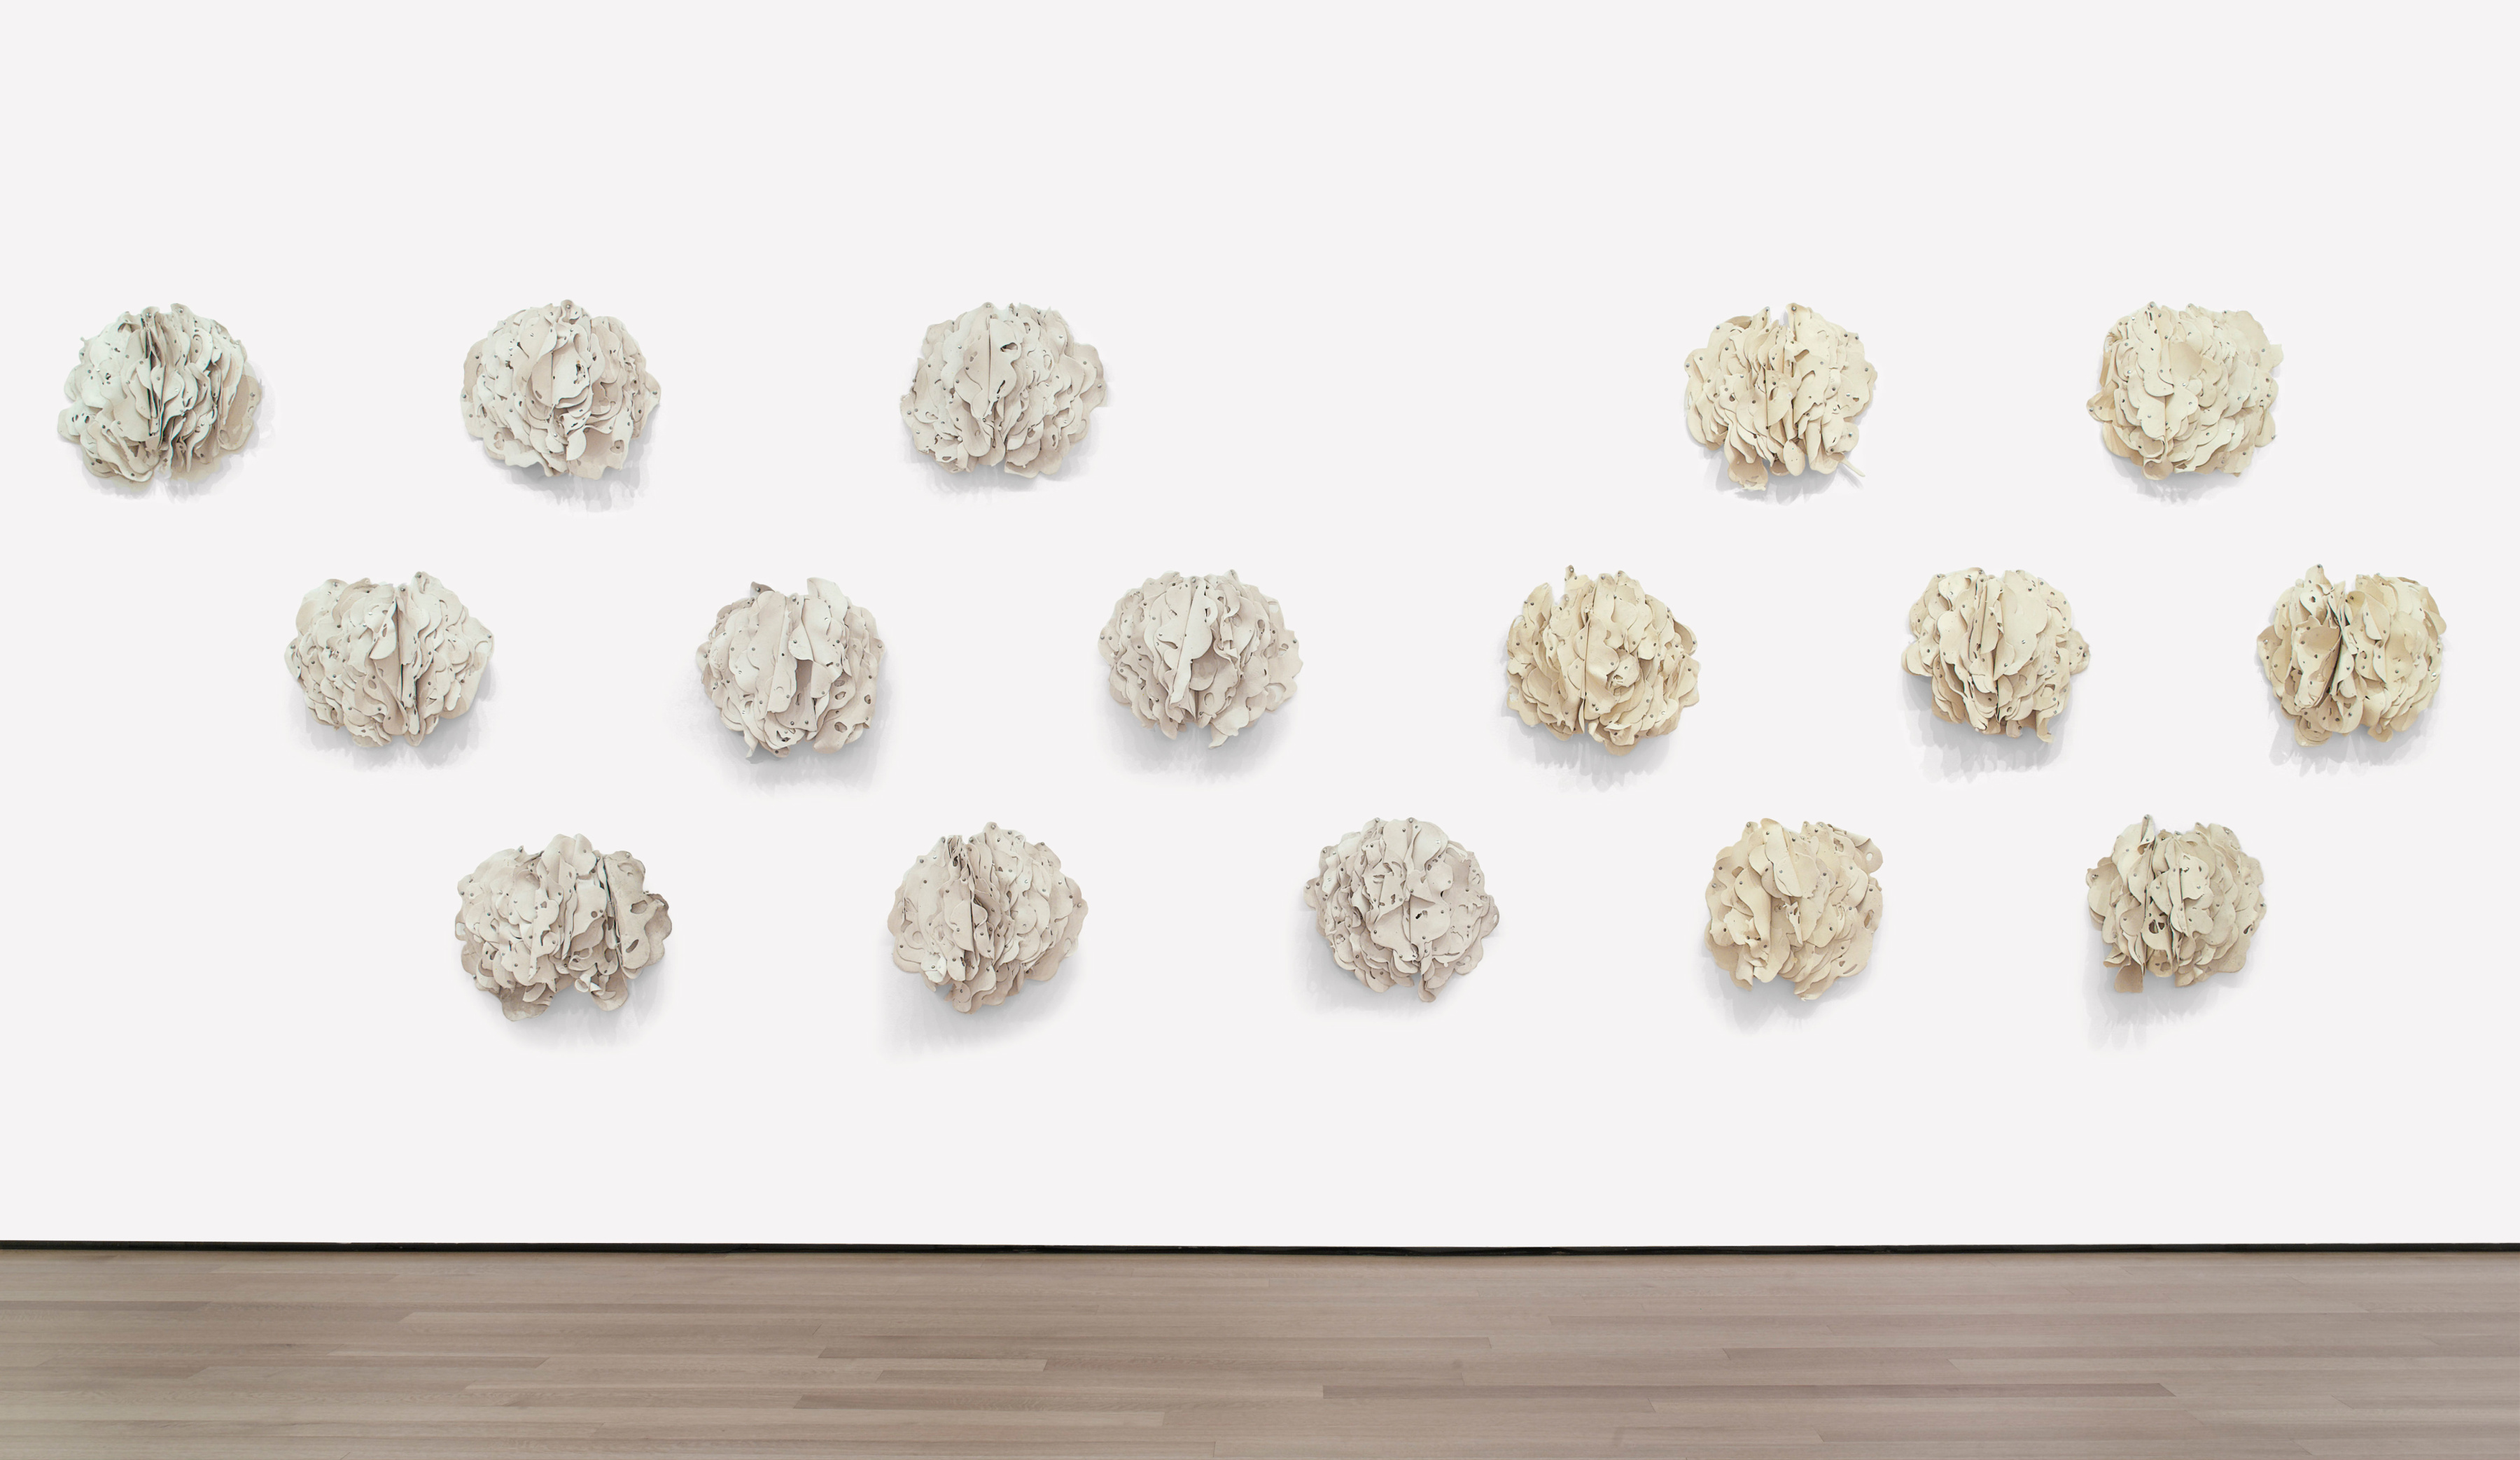 [FIG. 7]

Hannah Wilke

Ponder-r-rosa 4, White Plains, Yellow Rocks, 1975

Latex, metal snaps, and push pins, 16 sculptures

Each: 17 &amp;times; 26 &amp;times; 5 3/4 inches (43.2 &amp;times; 66 &amp;times; 14.6 cm)

Overall: 68 &amp;times; 250 &amp;times; 5 3/4 inches (172.7 &amp;times; 635 &amp;times; 14.6 cm)

The Museum of Modern Art, New York;

Committee on Painting and Sculpture Funds and gift of

Marsie, Emanuelle, Damon and Andrew Scharlatt,

Hannah Wilke Collection &amp;amp; Archive, Los Angeles.

Digital Image &amp;copy; The Museum of Modern Art /

Licensed by SCALA / Art Resource, NY.